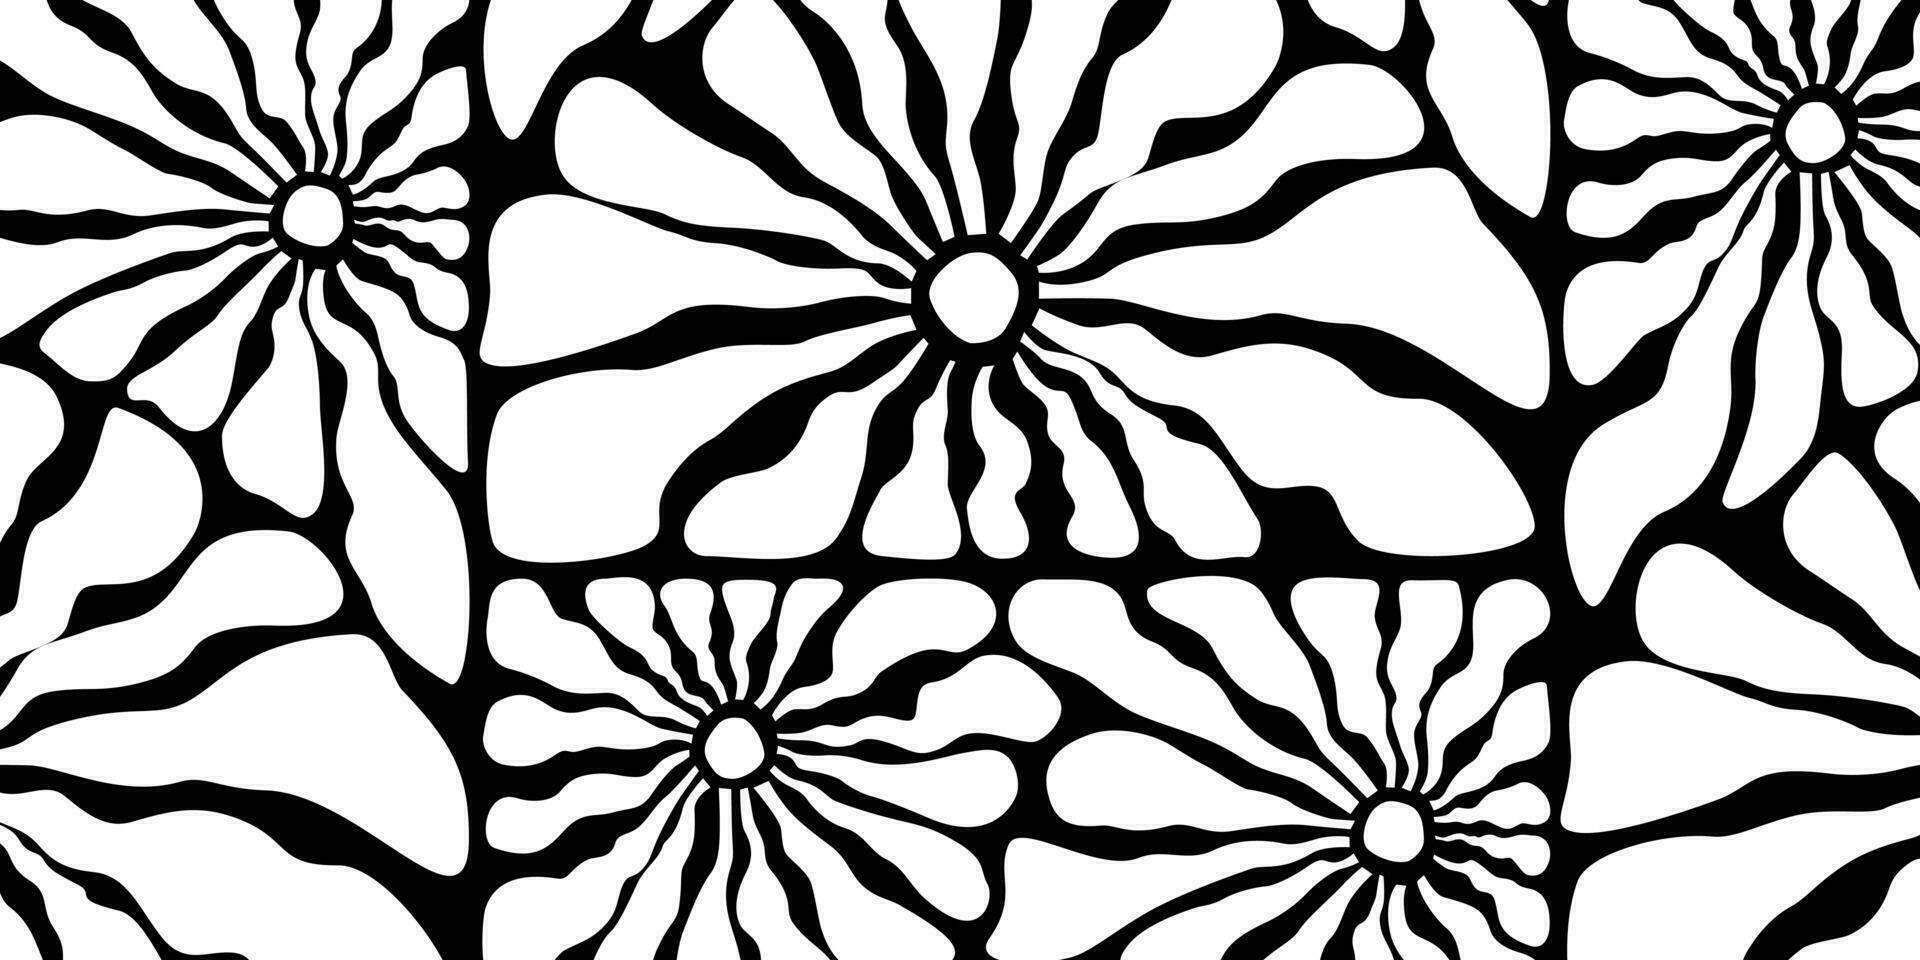 Abstract trendy flower pattern background vector